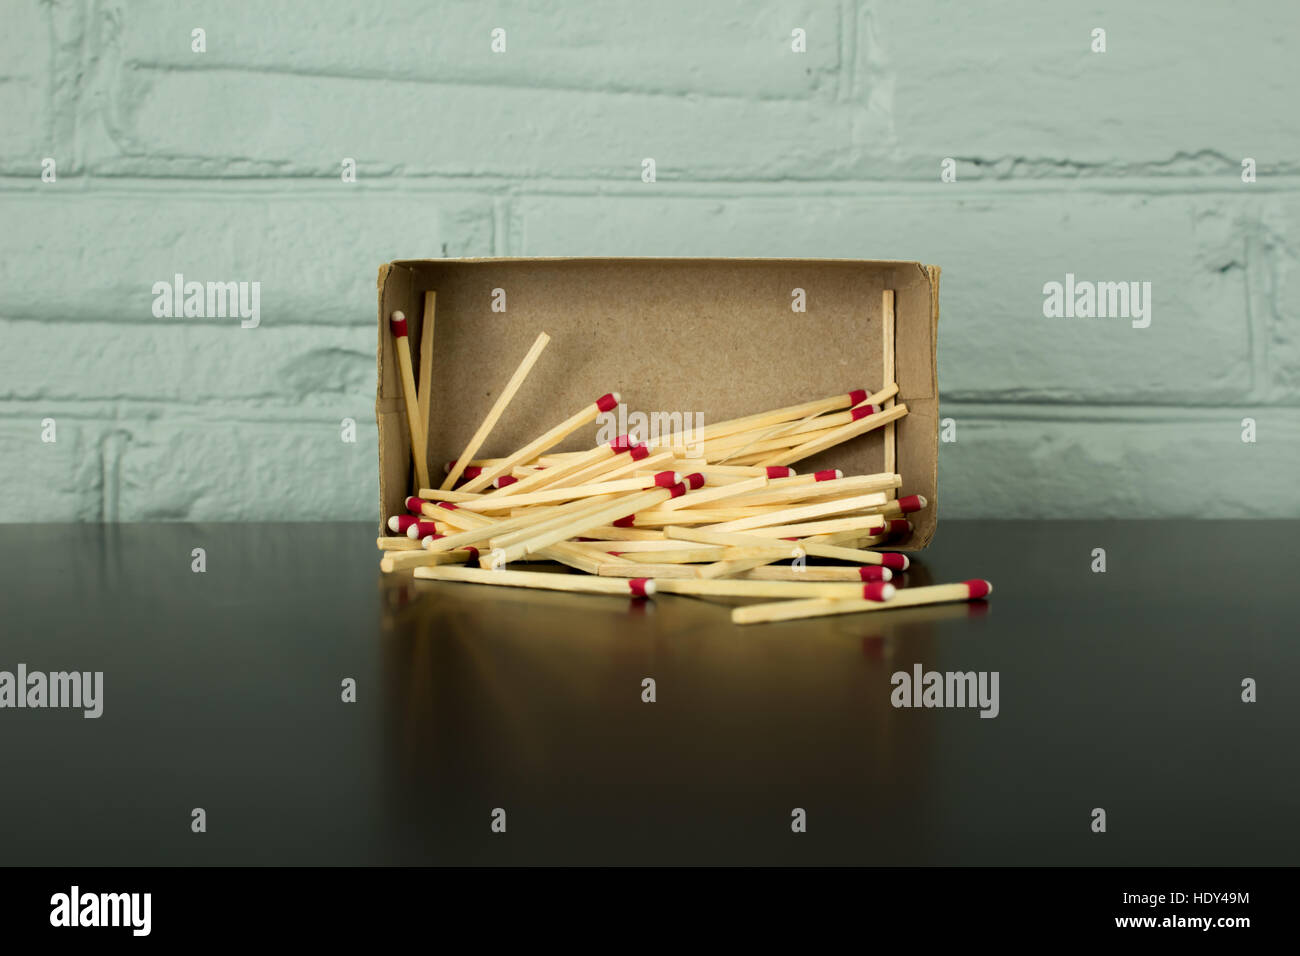 Strike-anywhere matches spilling out of matchbox against a blue painted brick background, with reflection on black table. Stock Photo